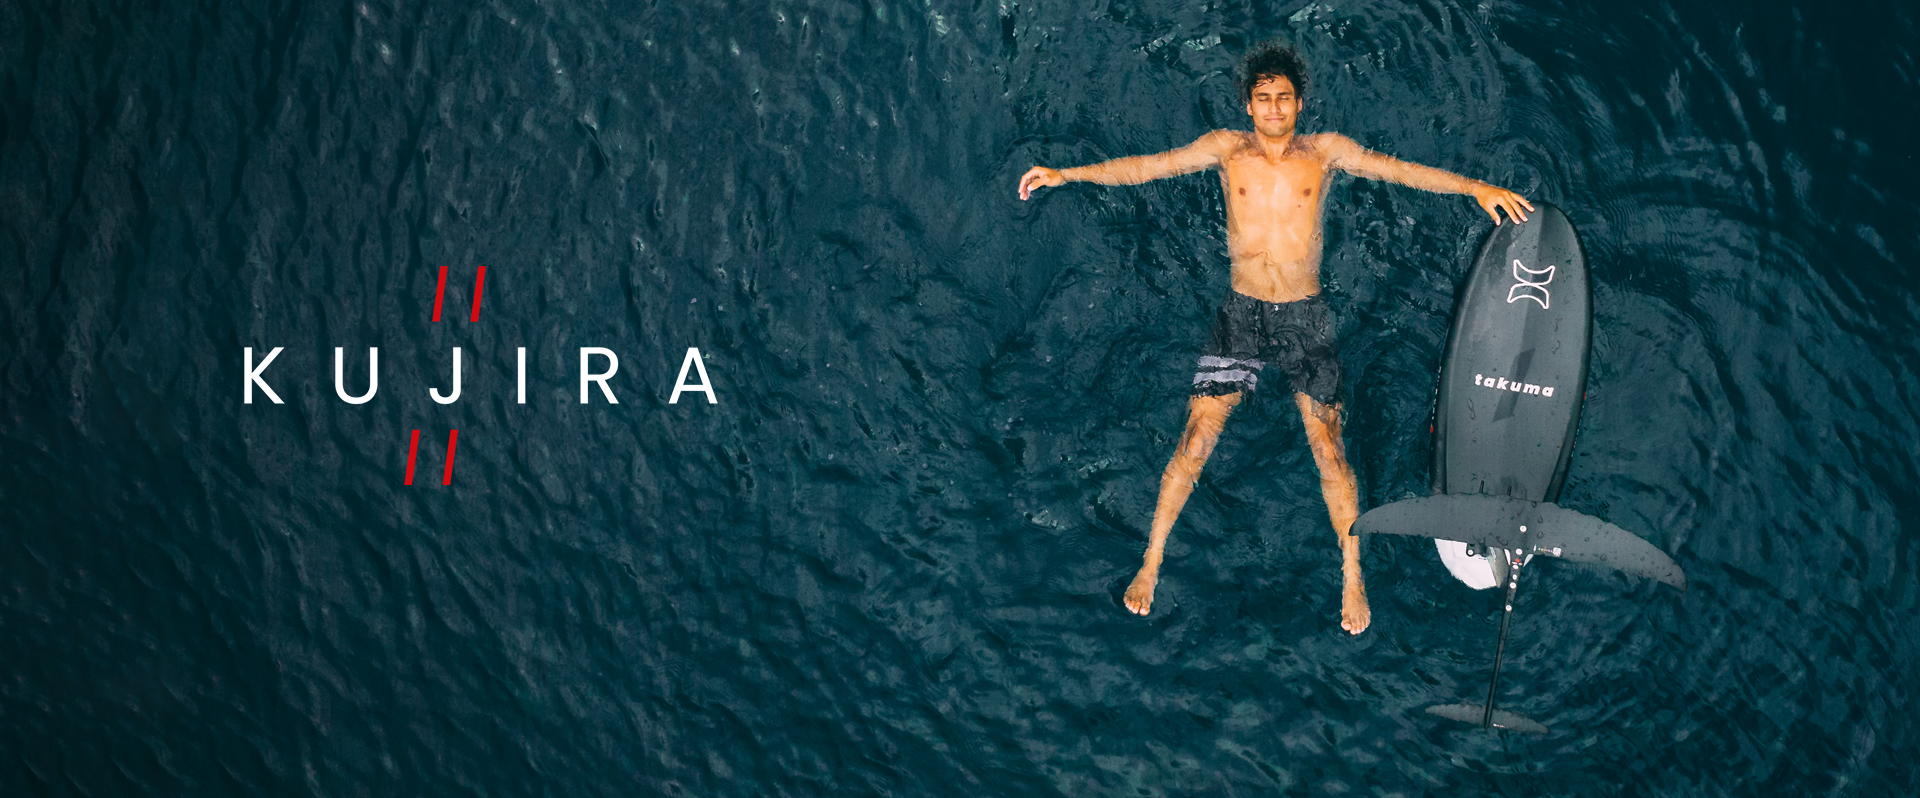 Find out more: Kujira II